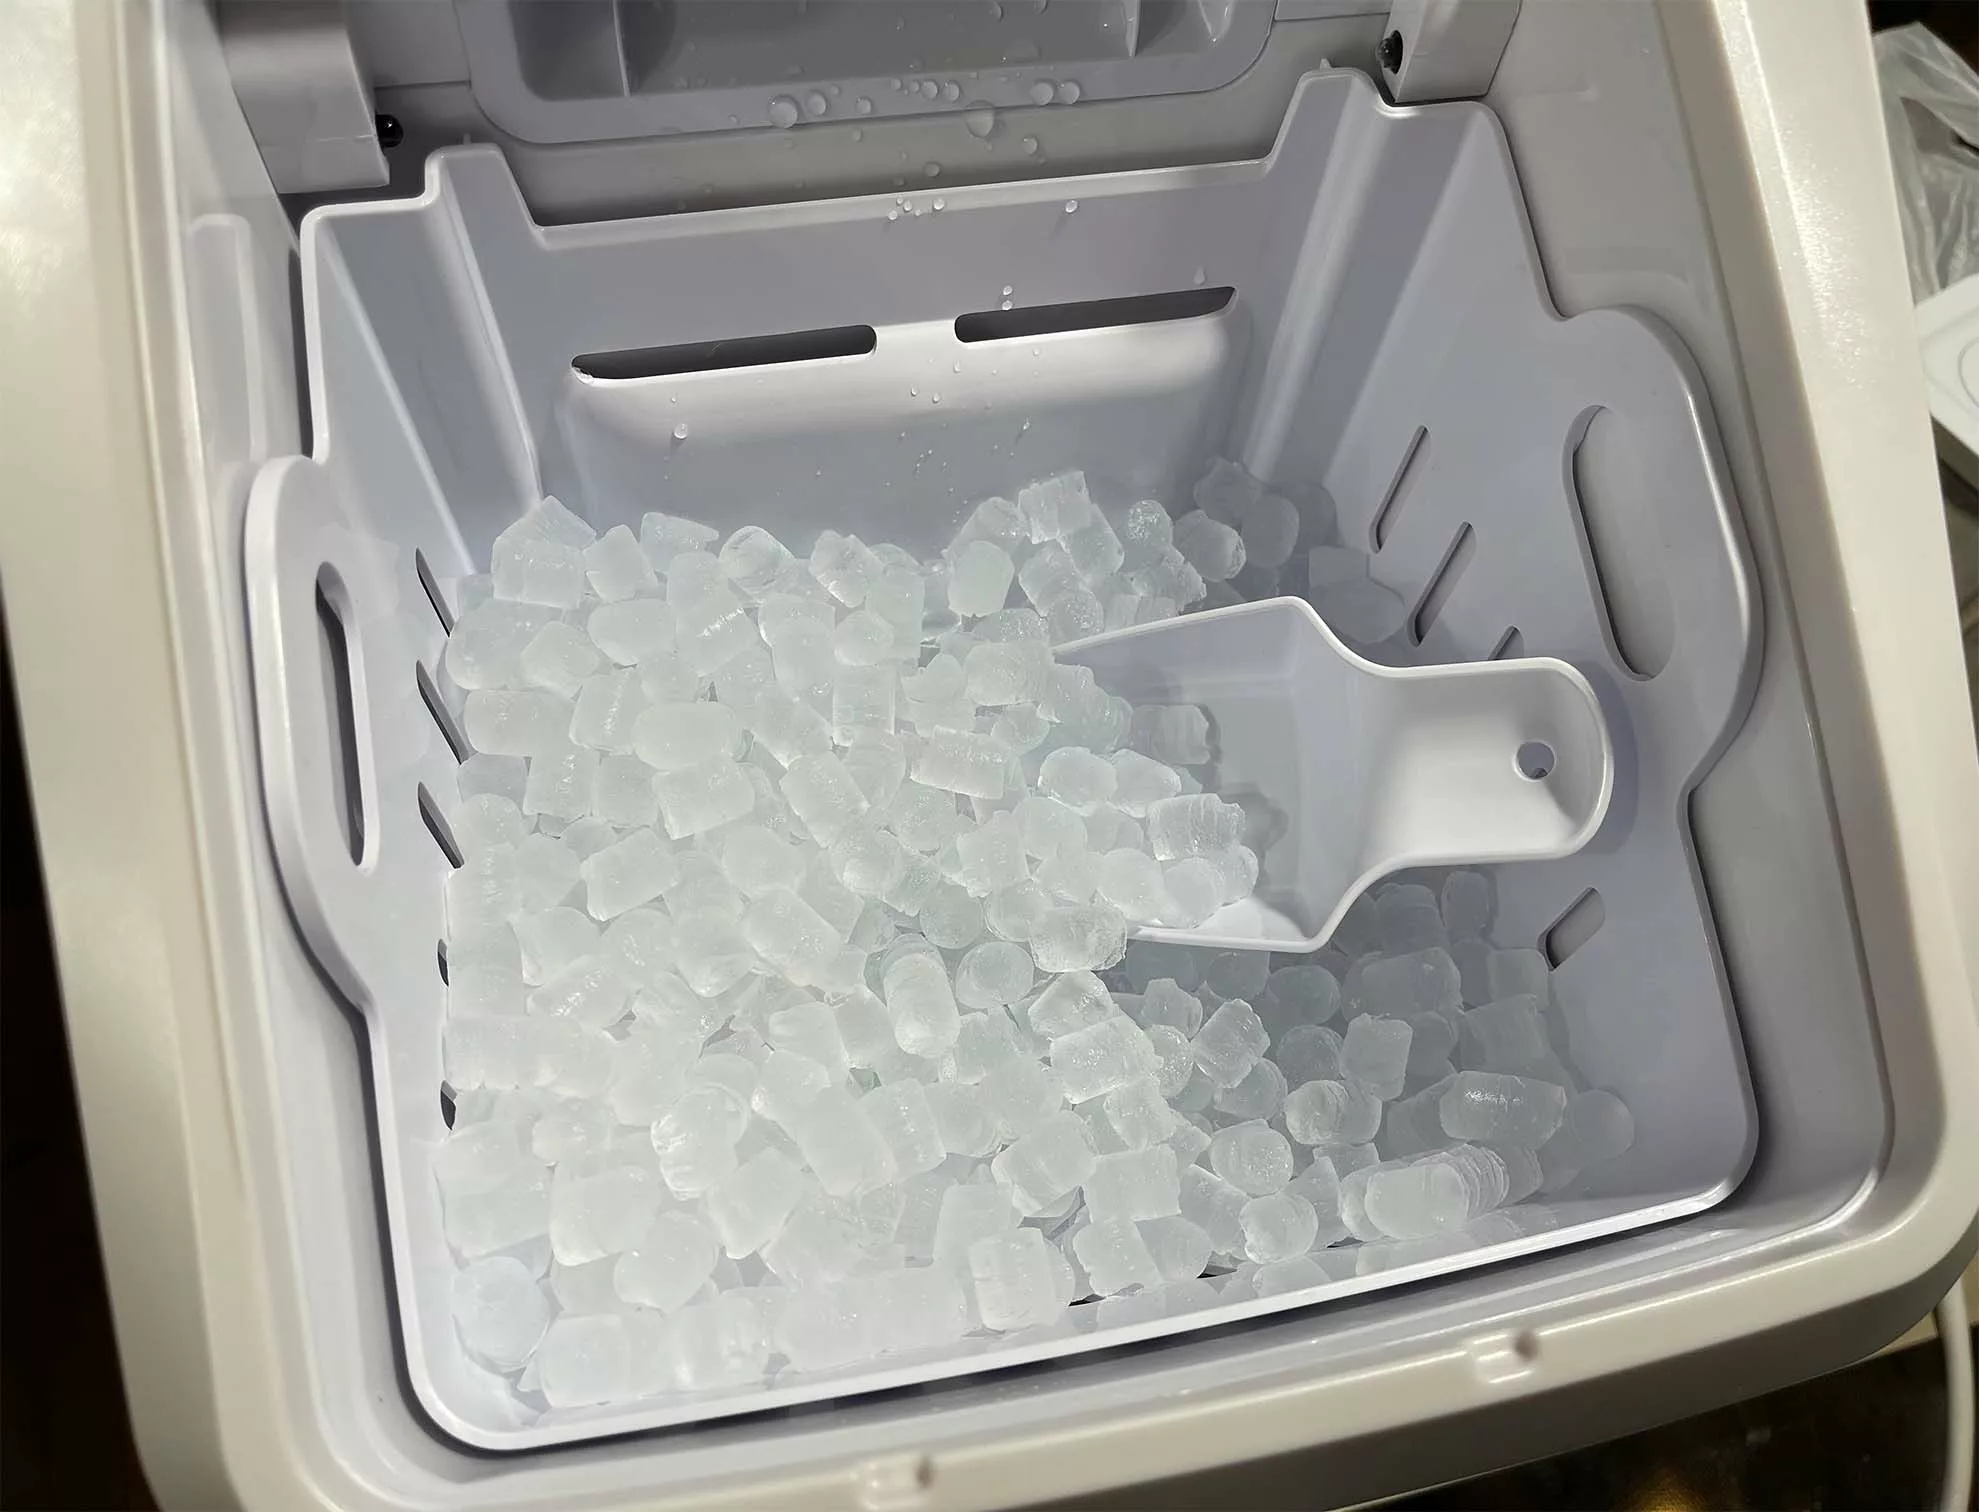 NUGGET ICE! My Oraimo Nugget Ice Maker Review - Chef Tips 